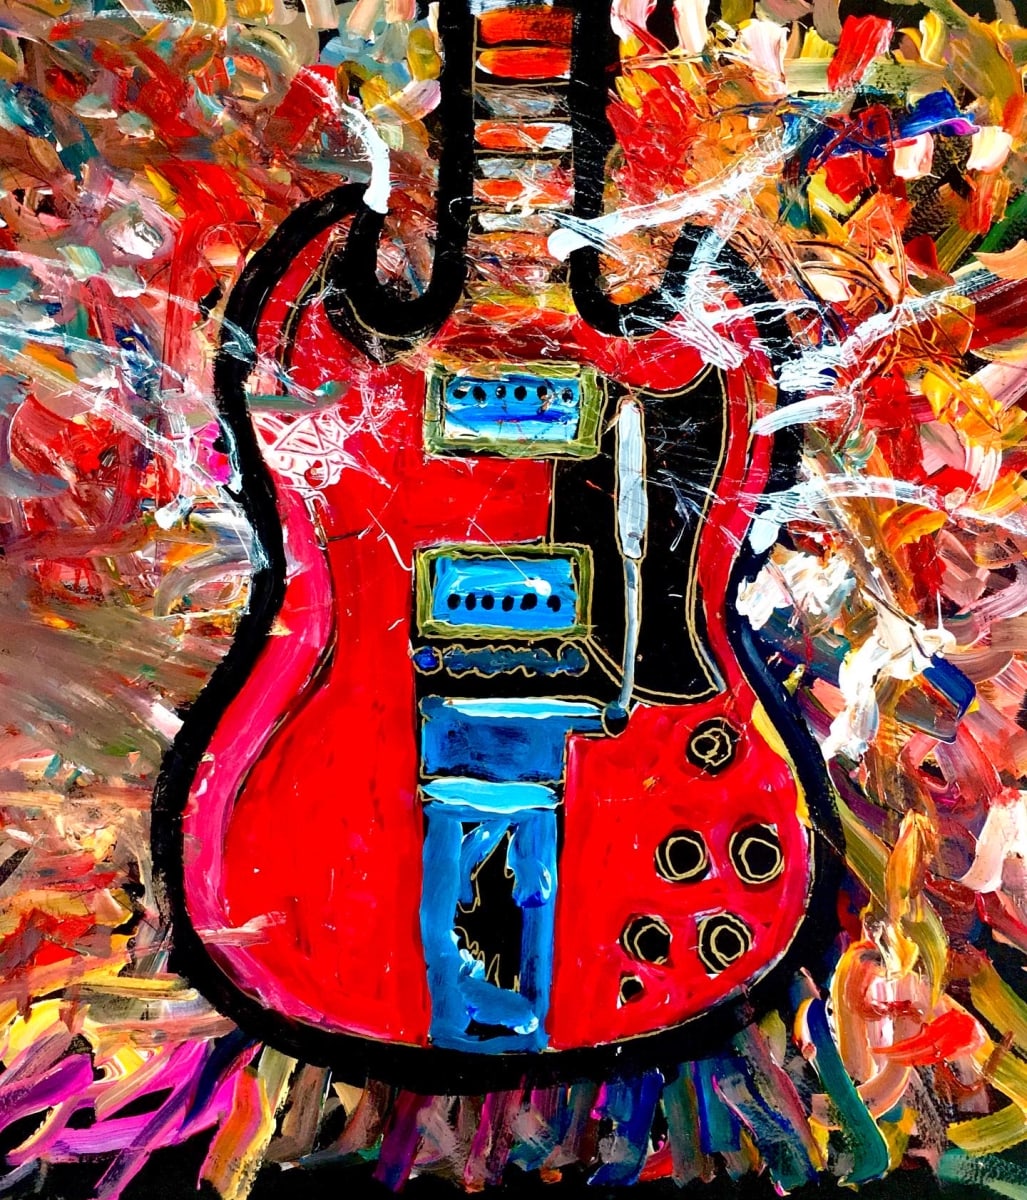 T-luke and the tight suits by Neal Barbosa  Image: Painted live onstage during live music